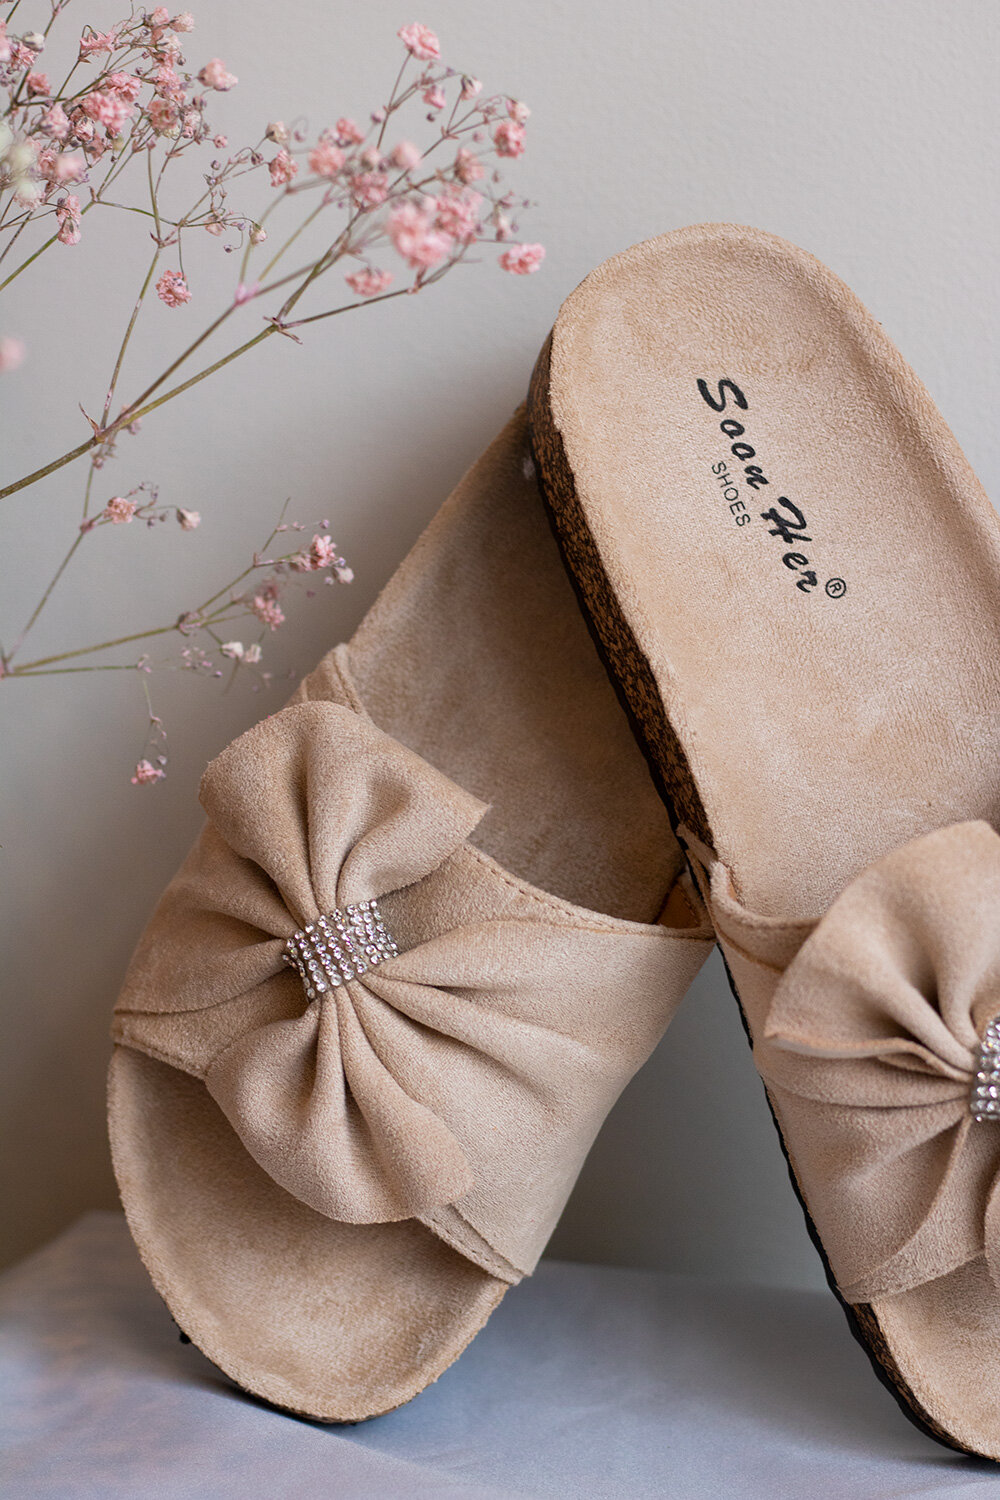 Sandals with Bow & Bling - Beige